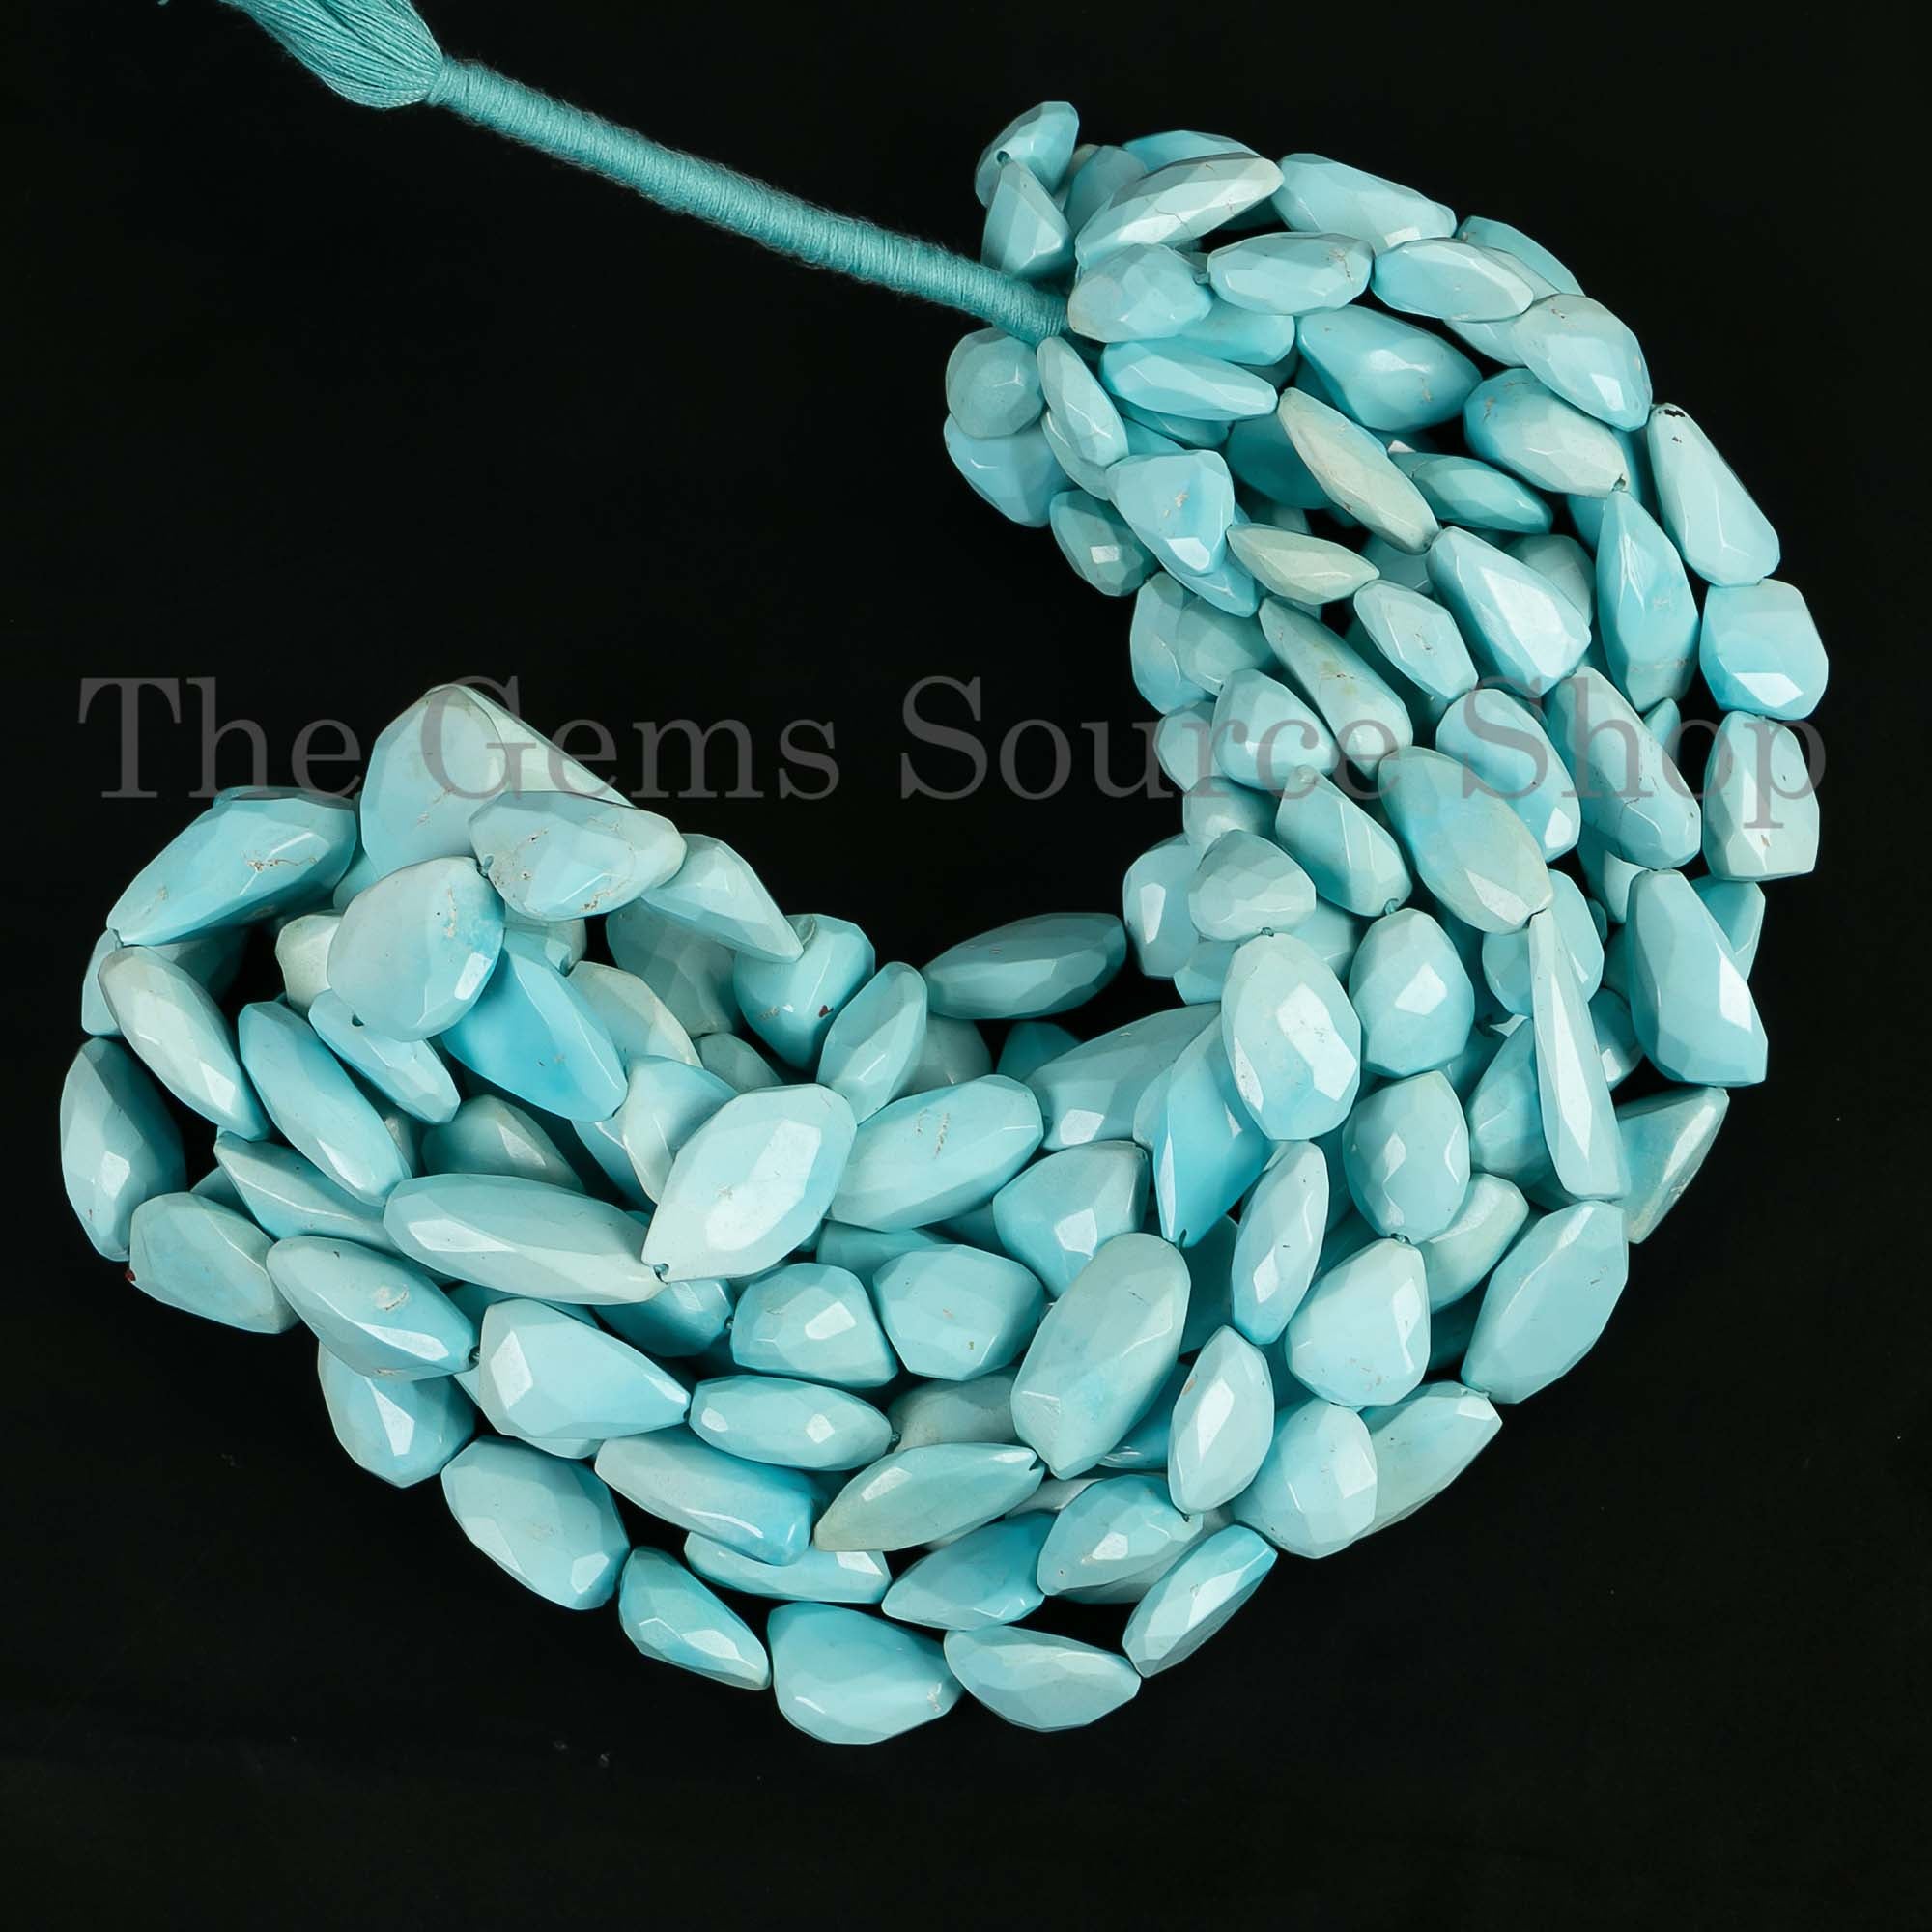 Natural Turquoise Briolette Nuggets, Turquoise Faceted Tumble Beads, Loose Turquoise Strand